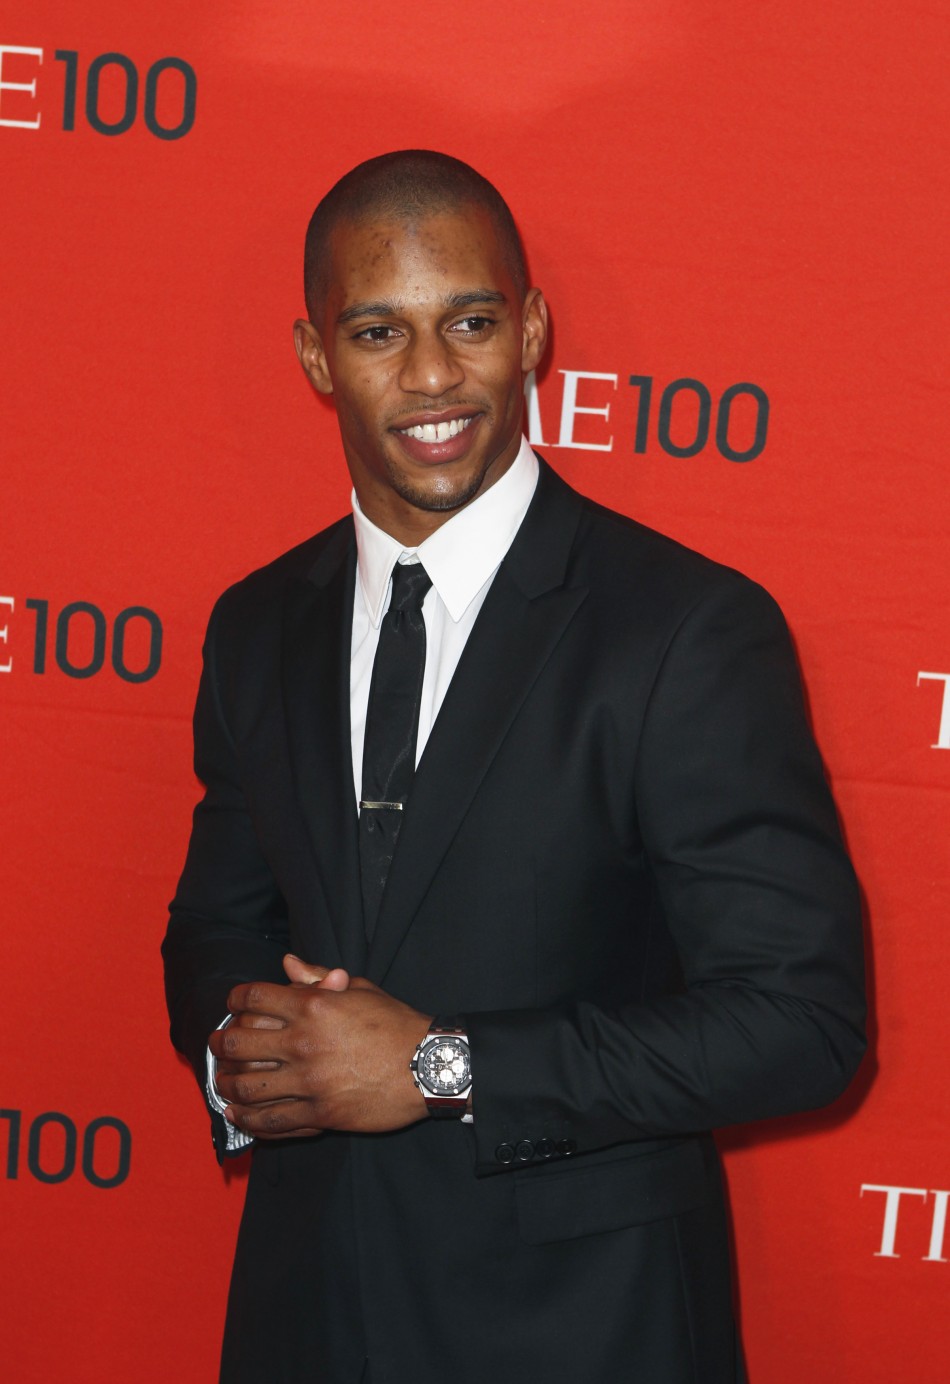 Football player Victor Cruz arrives to be honored at the Time 100 Gala in New York